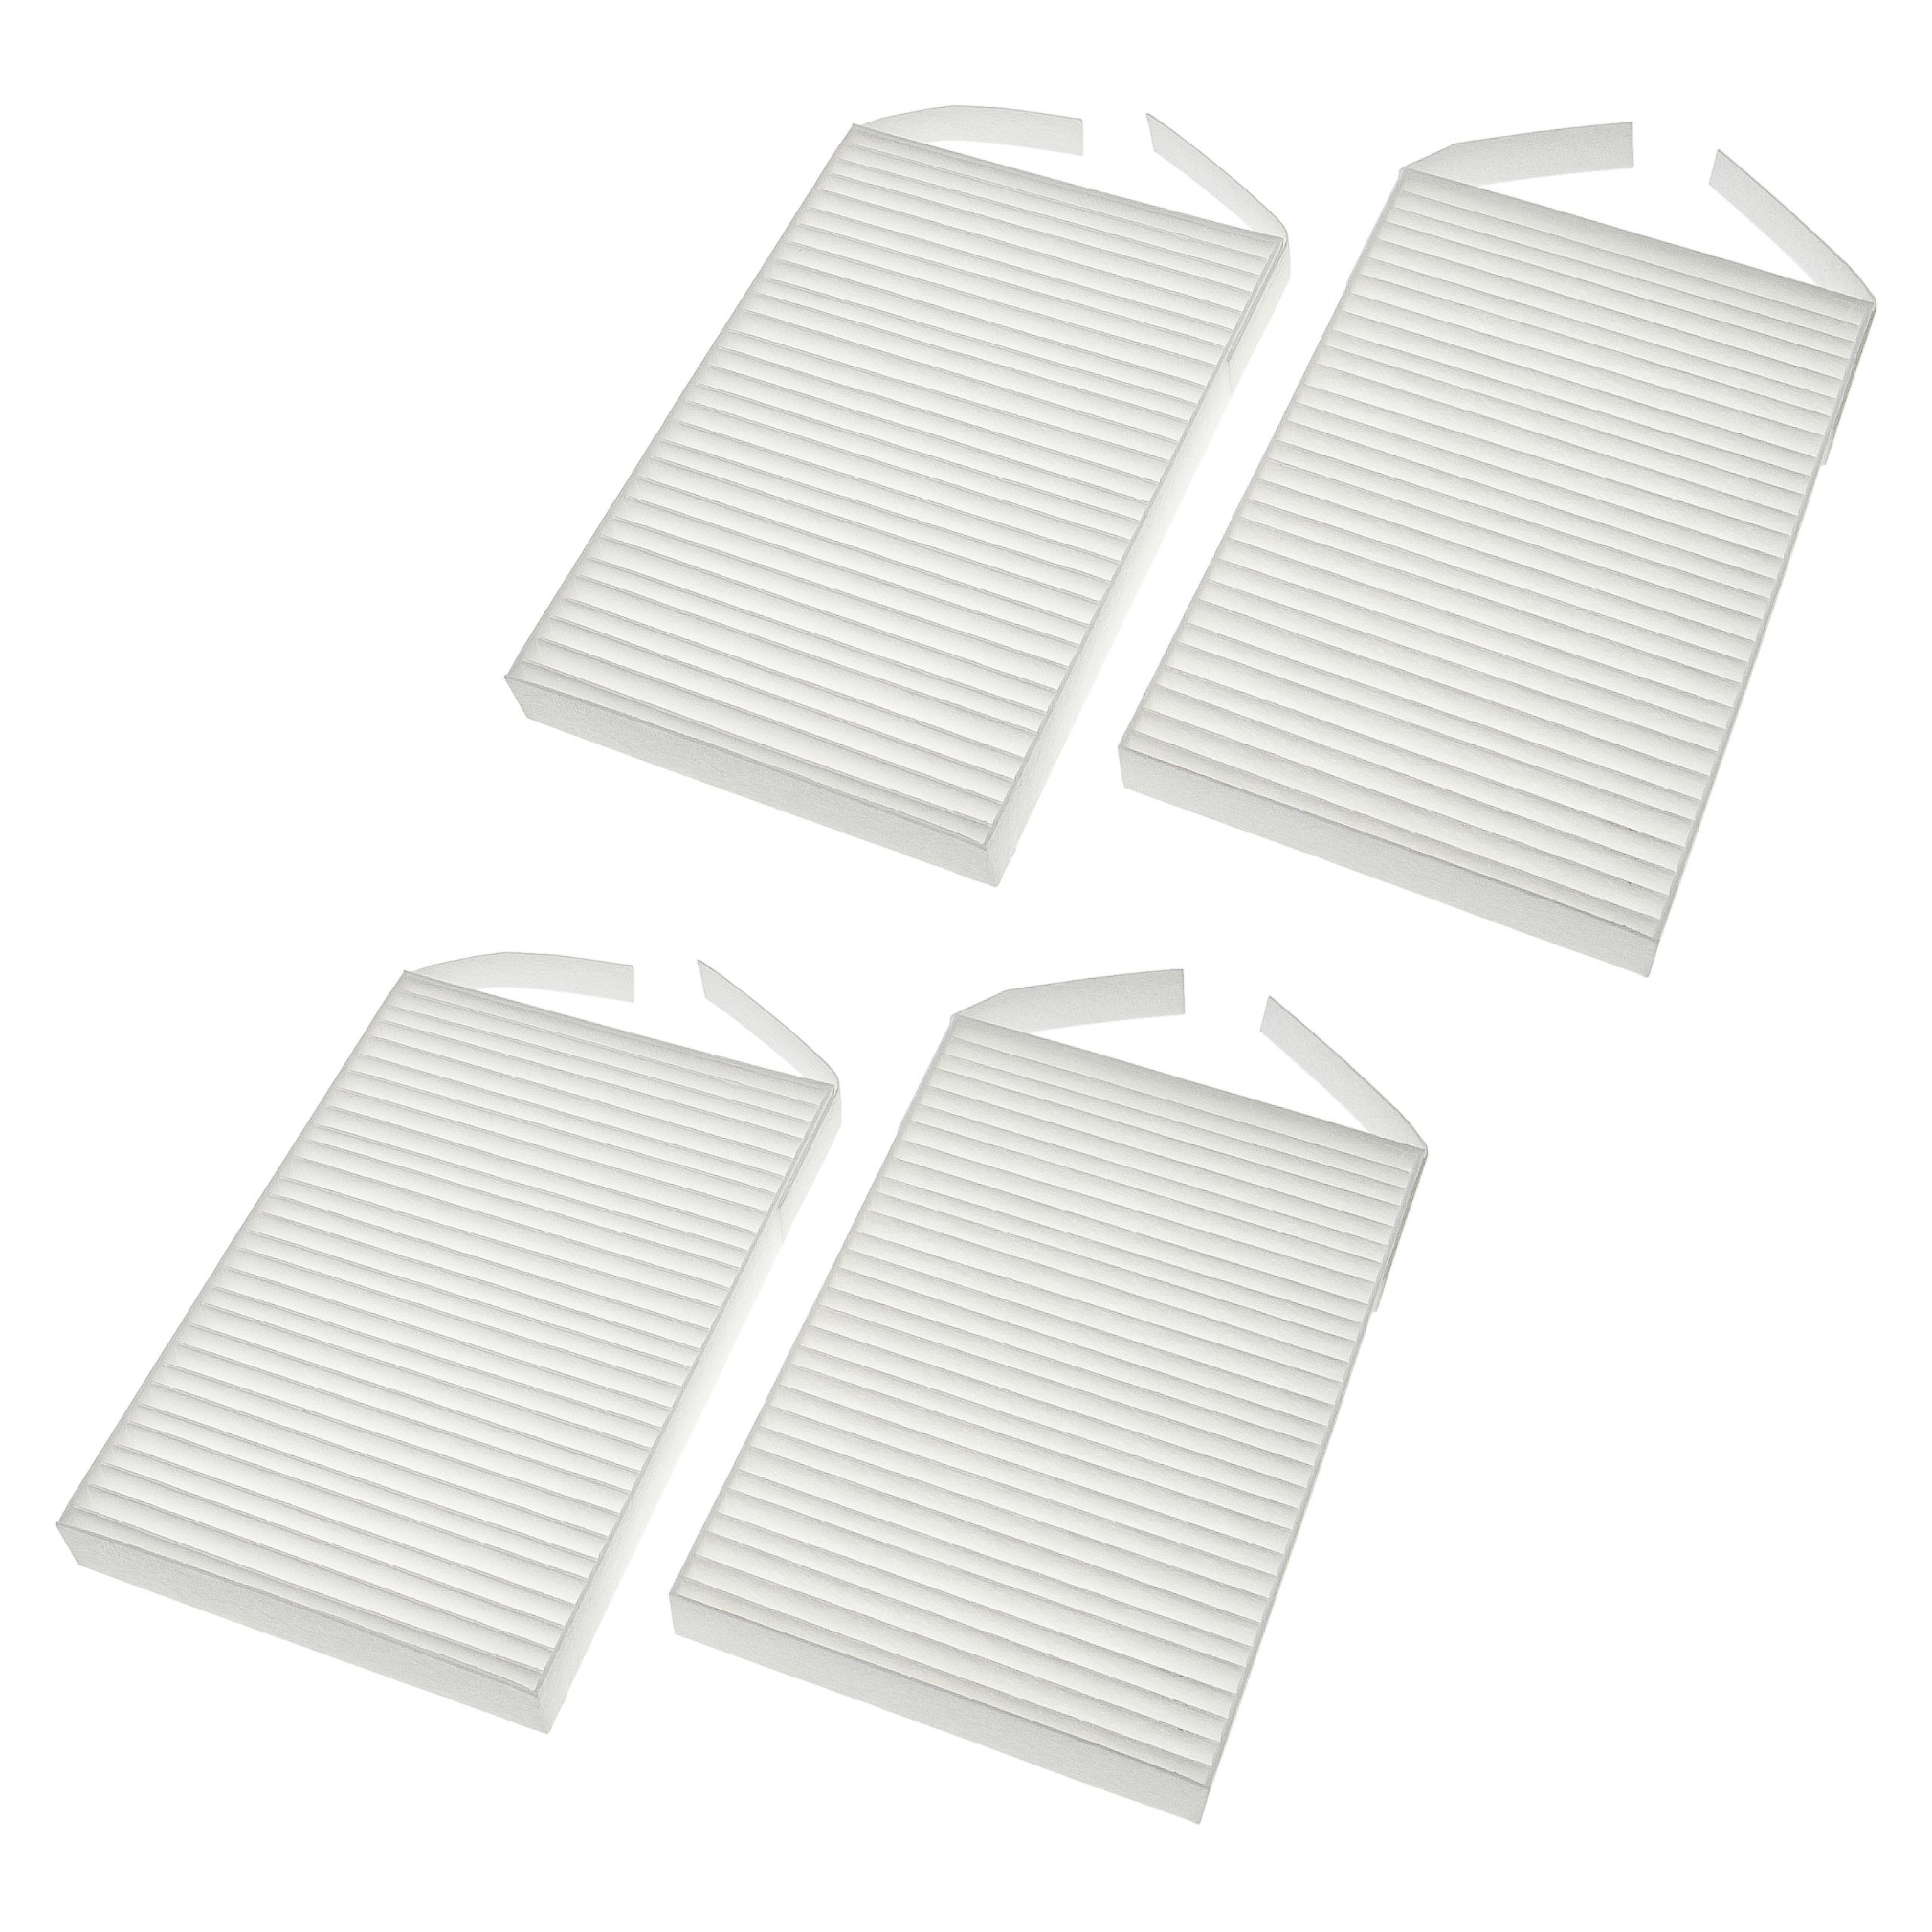 Air Filter Set Replacement for Wernig 527005400 for Ventilation Devices - G4 / F7